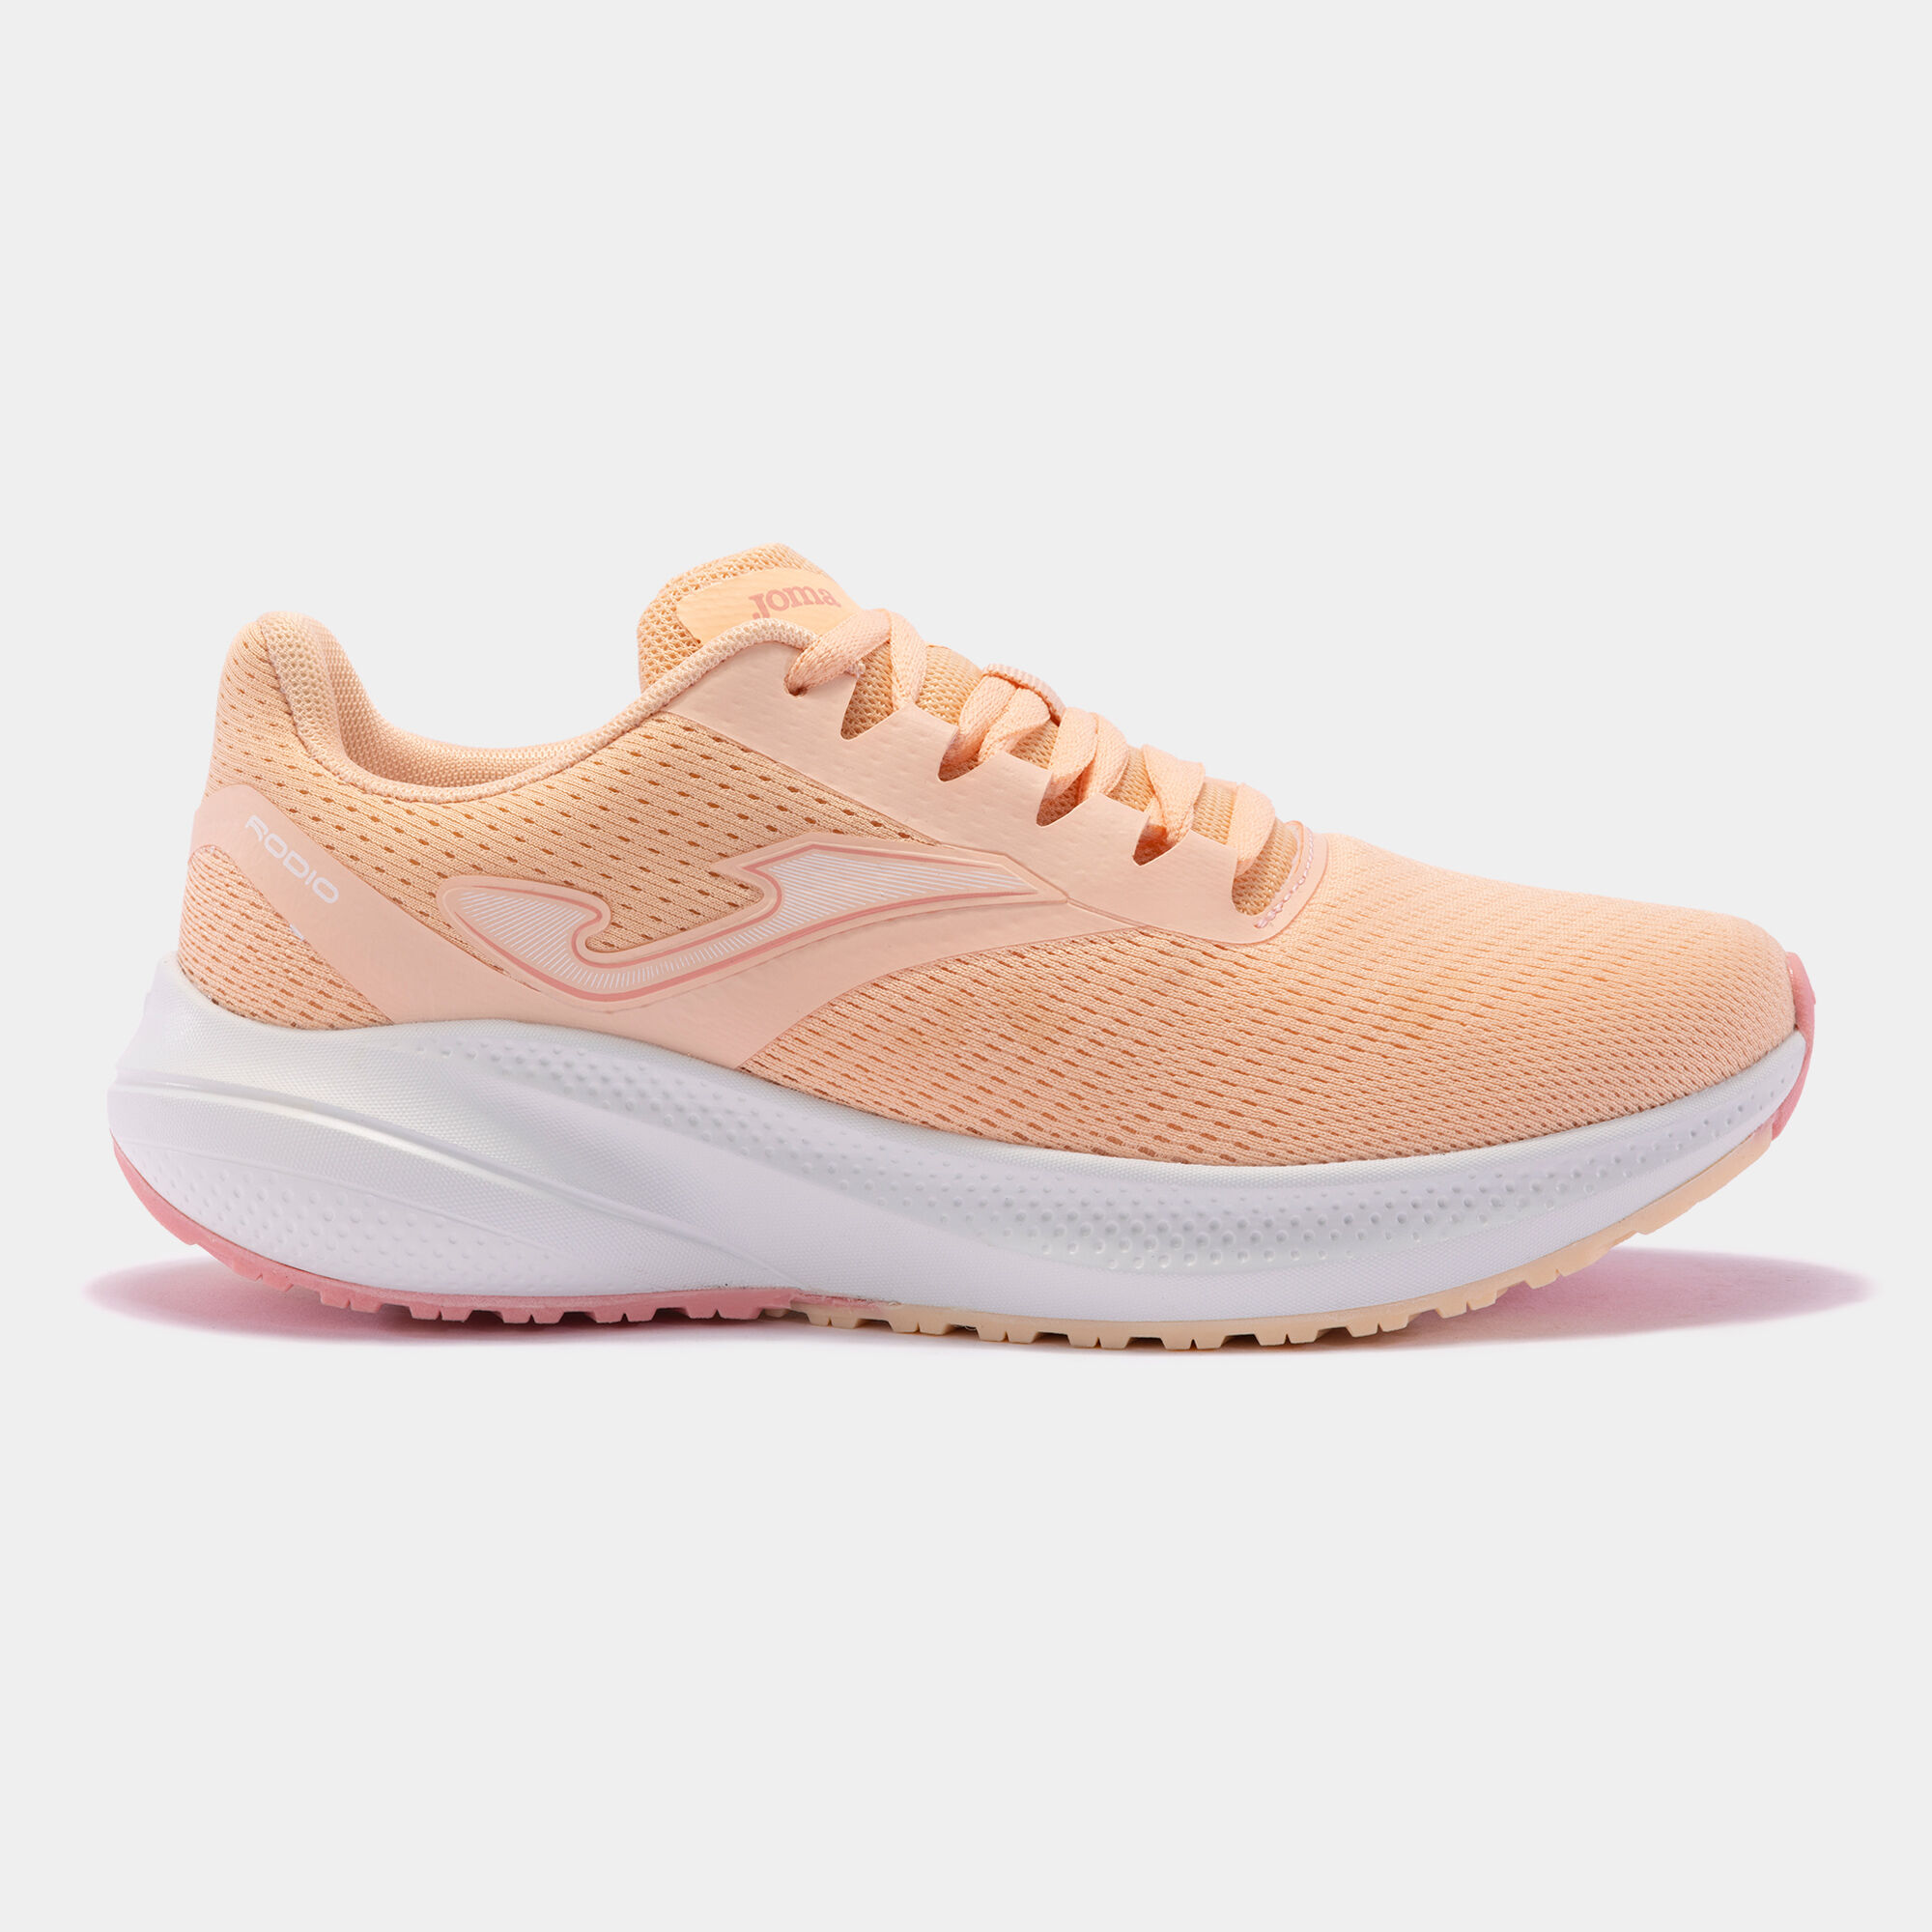 Chaussures running Rodio Lady 24 femme rose